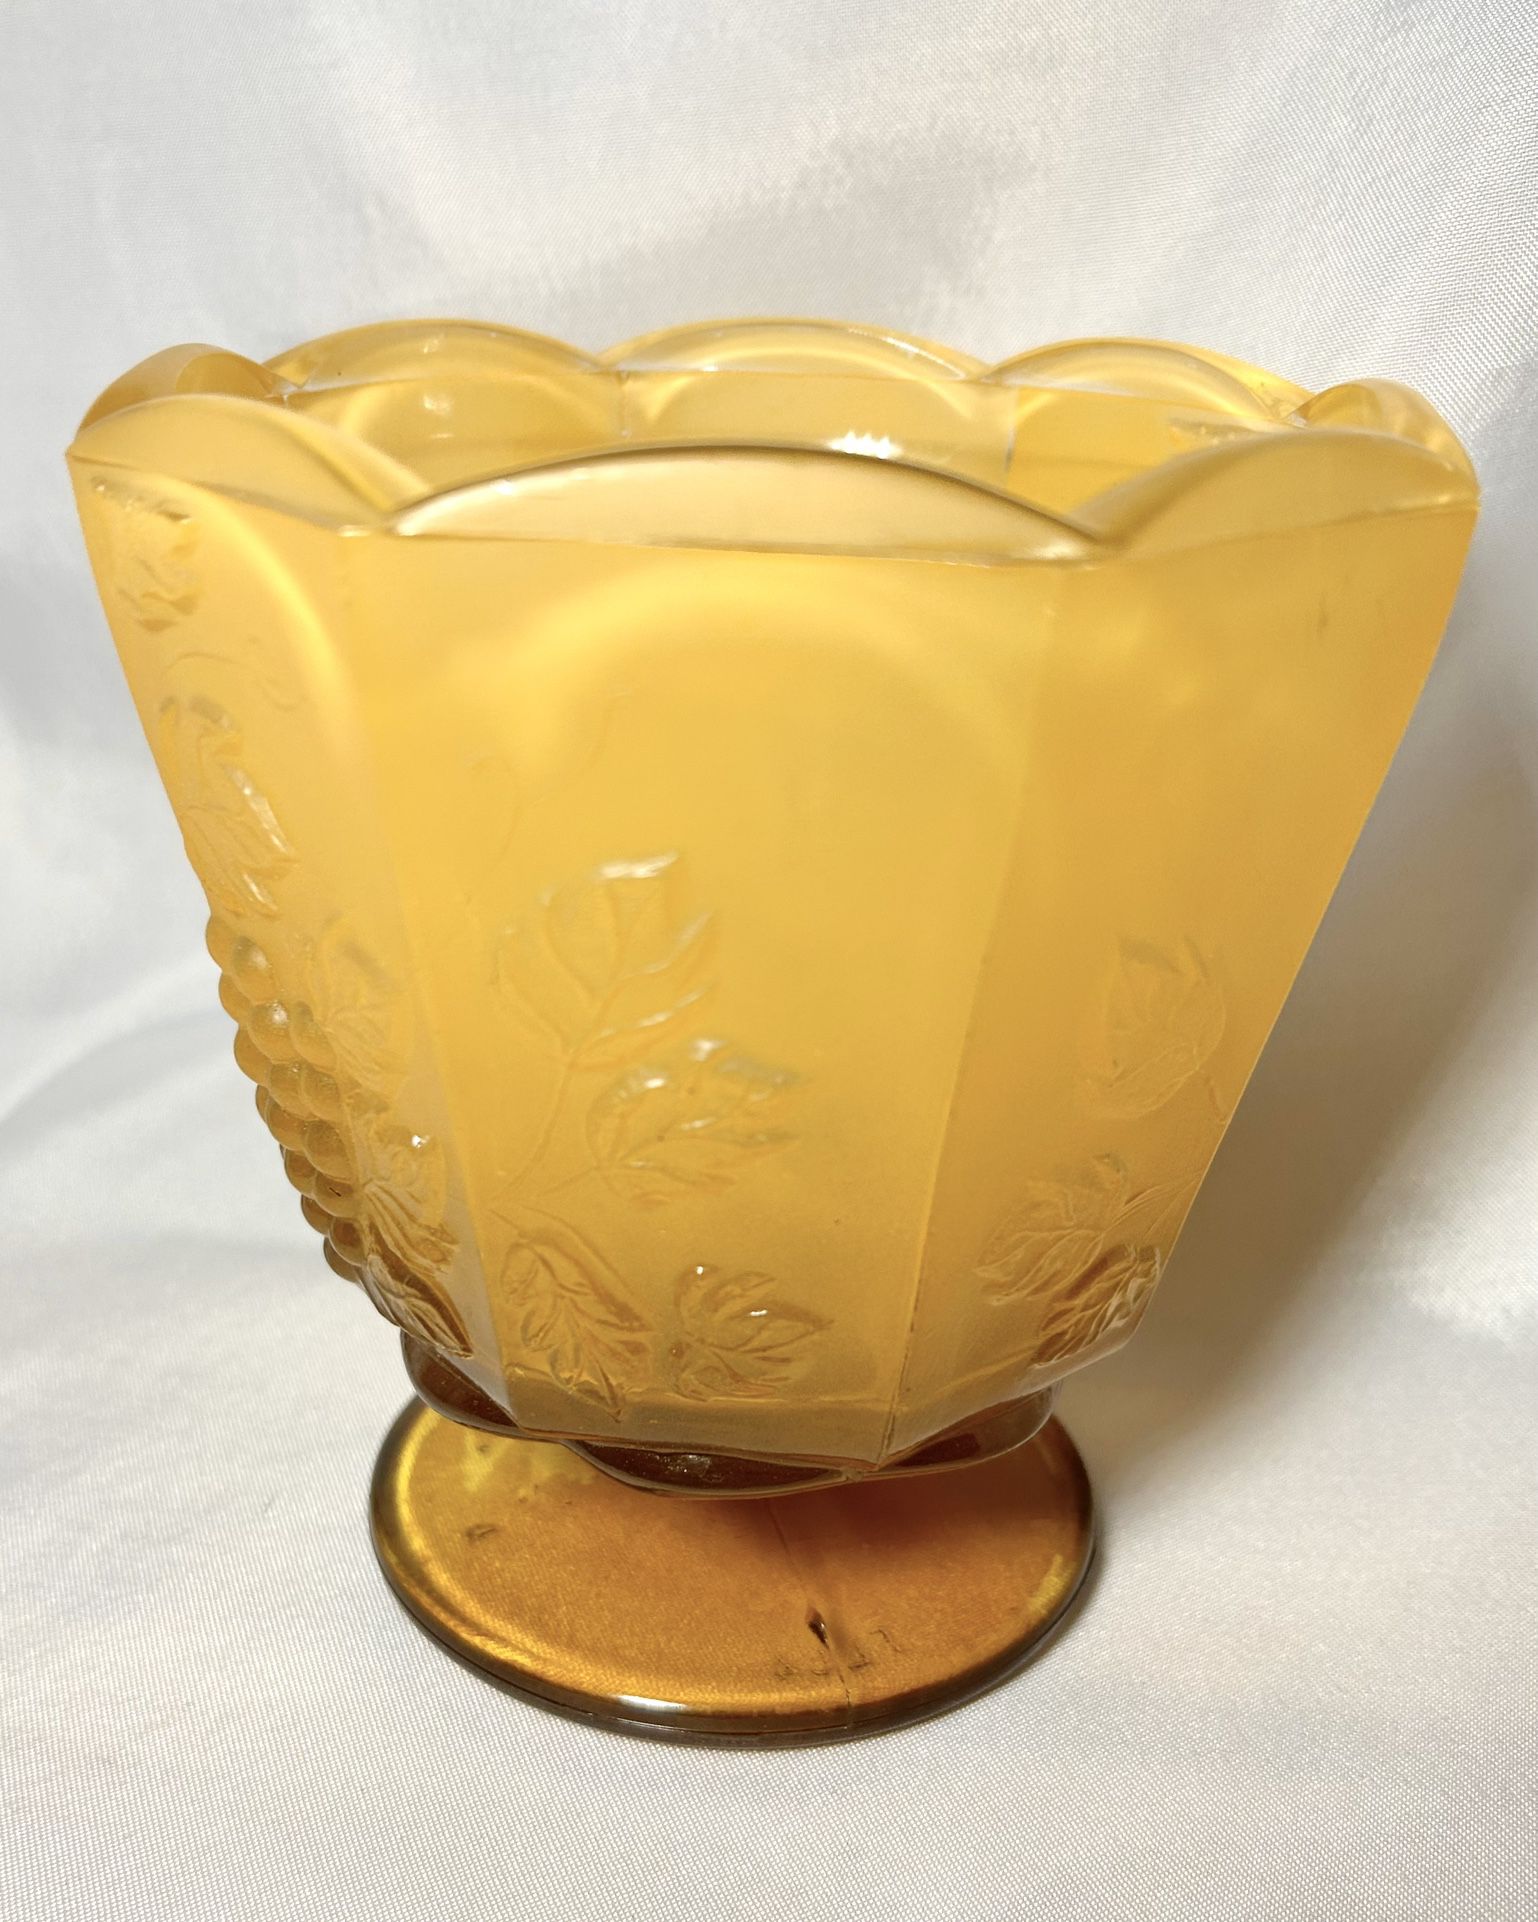 UNIQUE VINTAGE AMBER GRAPE BOWL SCALLOPED PEDESTAL FROSTED GLASS CANDY DISH see pics for scratches